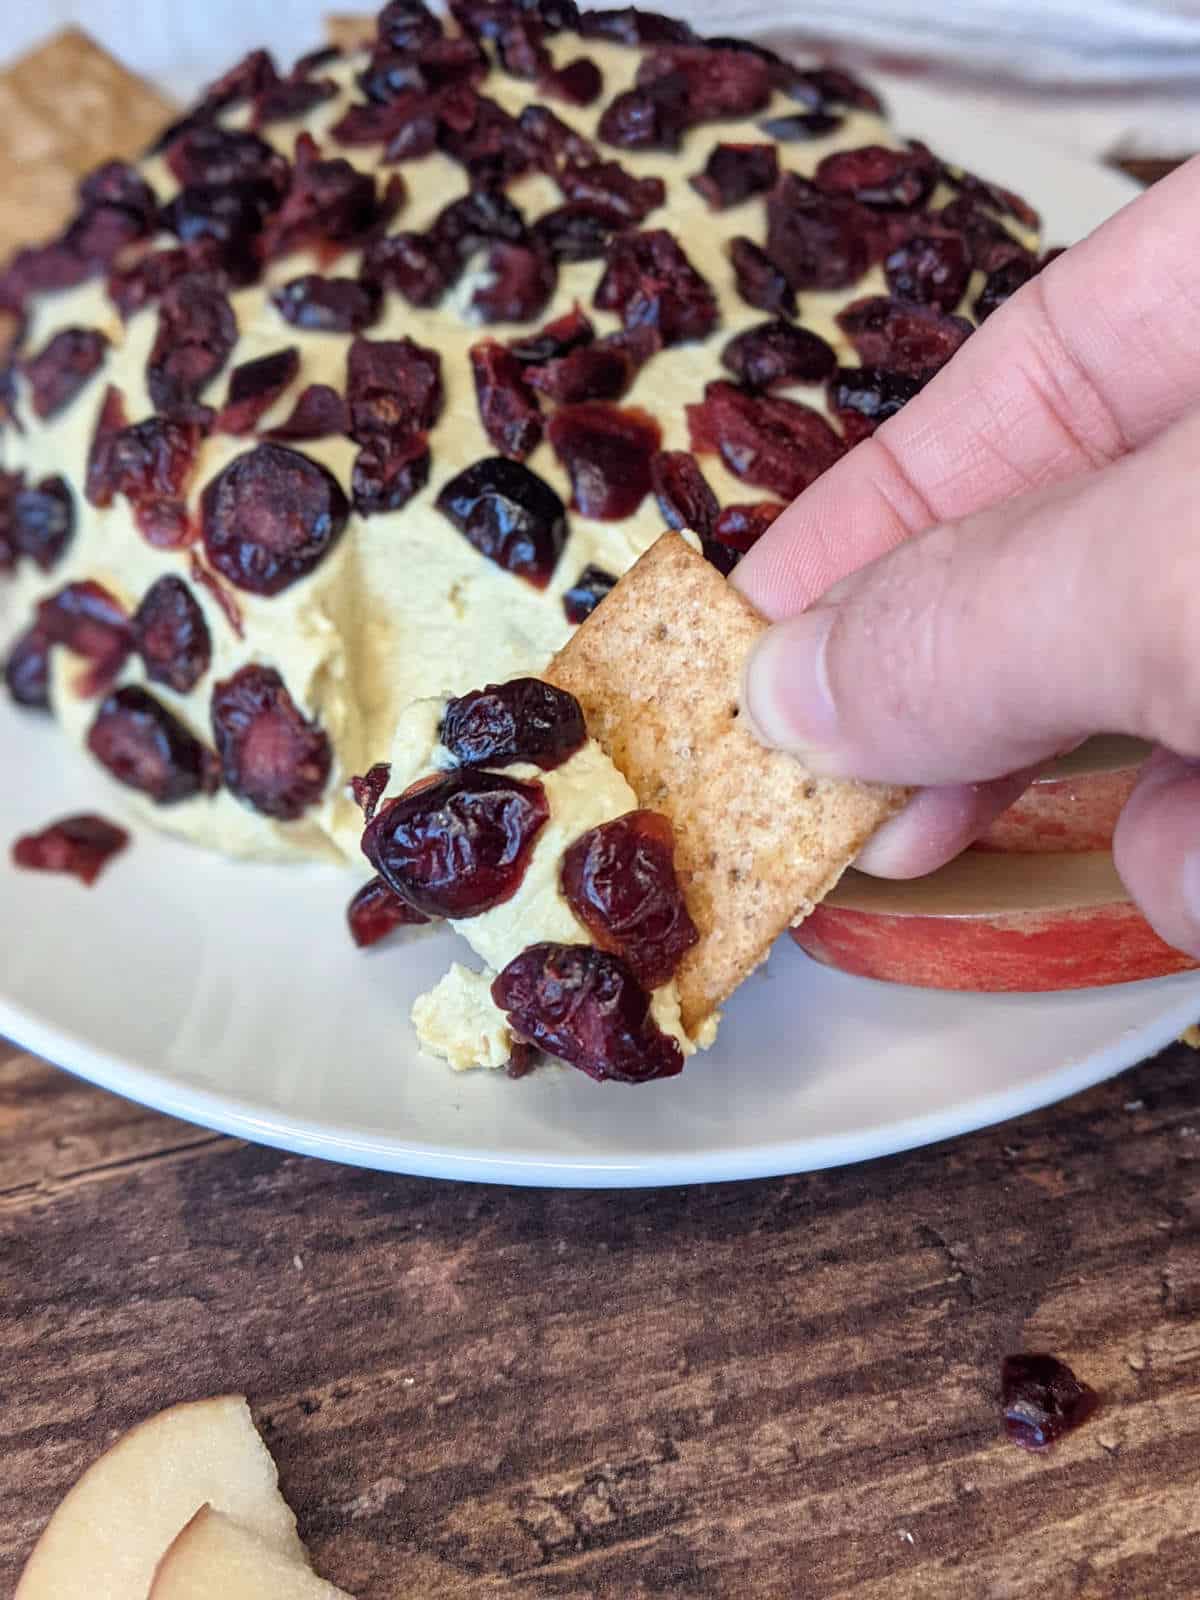 Hand holding cracker to scoop a bite of the vegan cheese ball.